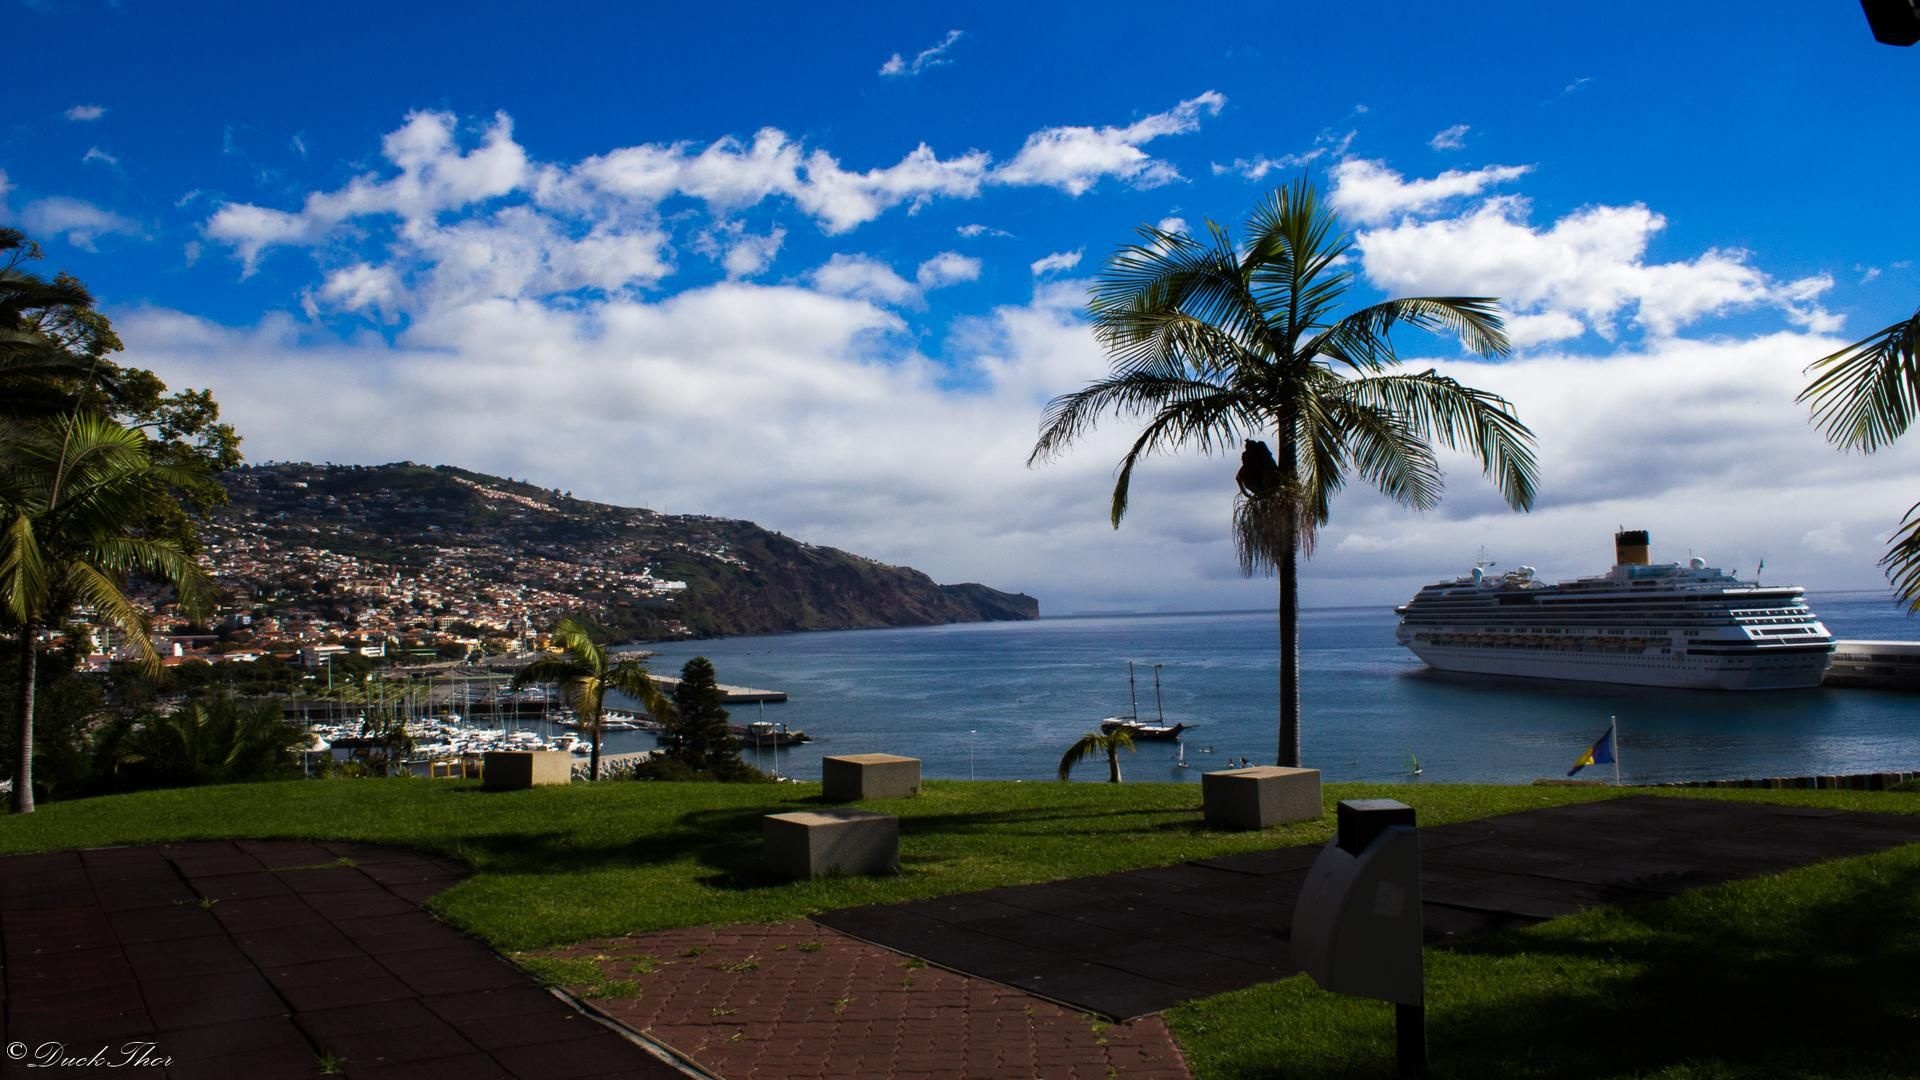 Madeira travels, Island wallpapers, Beautiful scenery, Picture-perfect, 1920x1080 Full HD Desktop